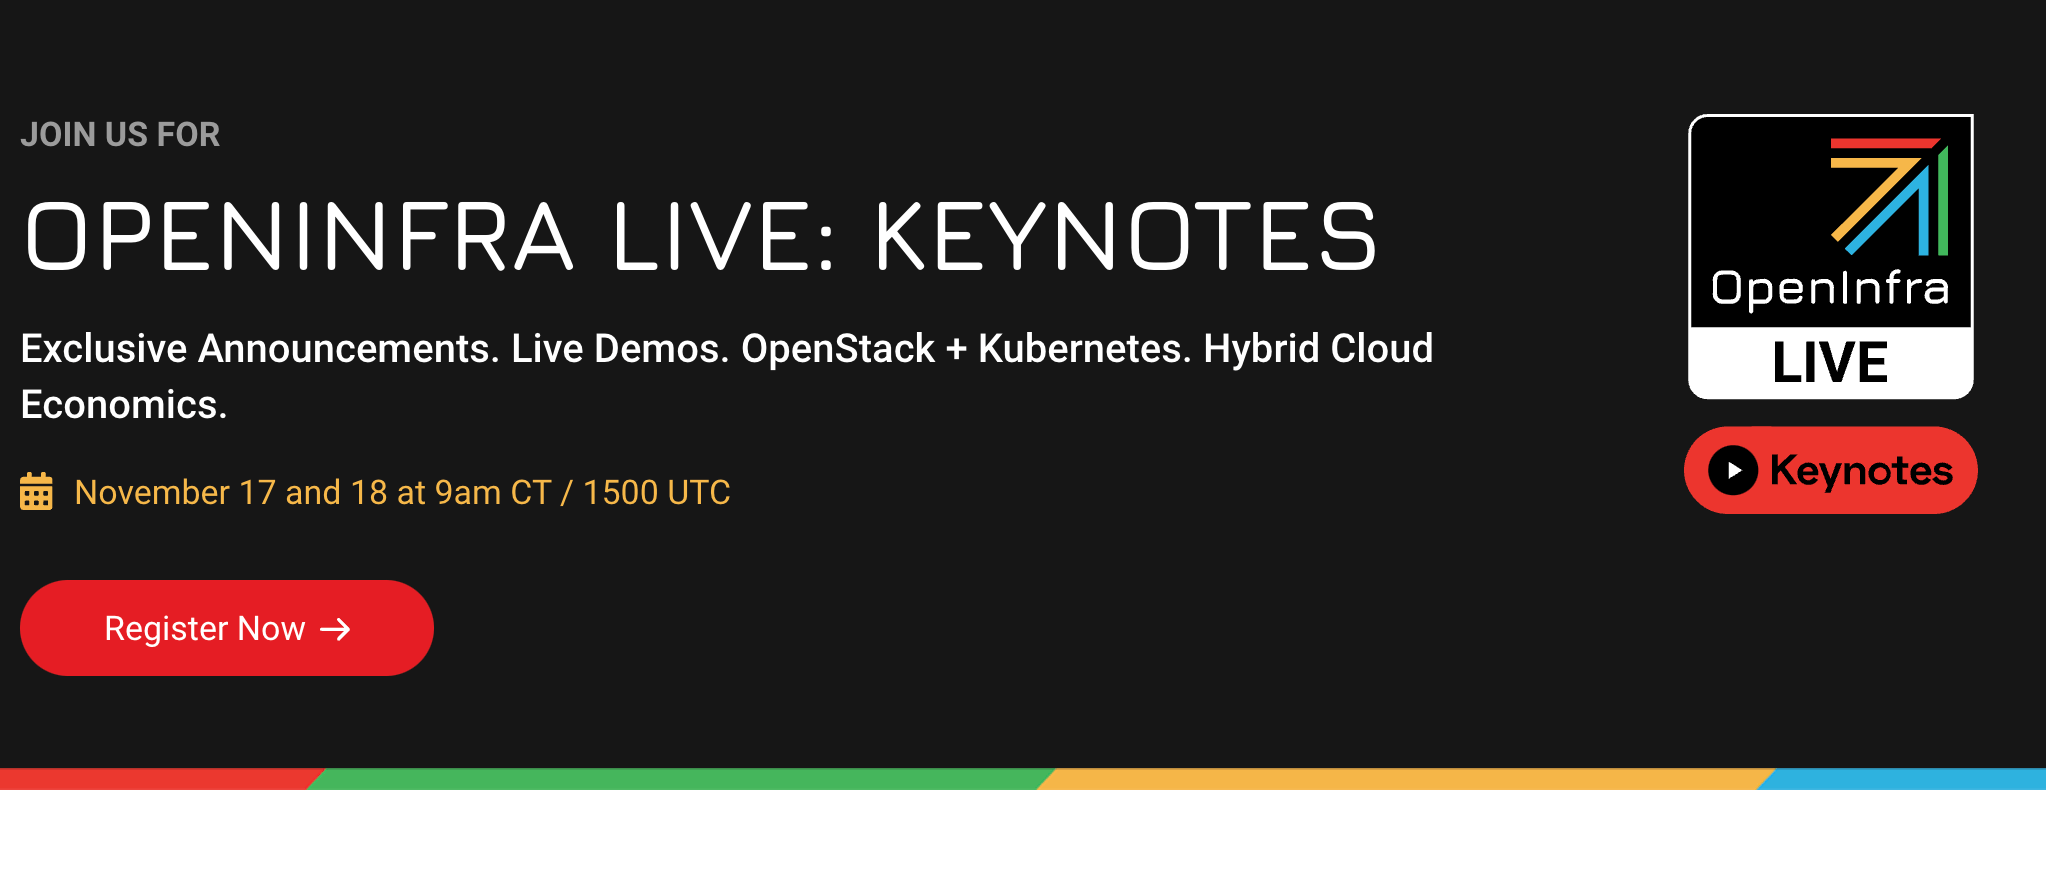 Coredge.io is Proudly Sponsoring OpenInfra Live Keynotes (Nov 17 & 18th 2021)